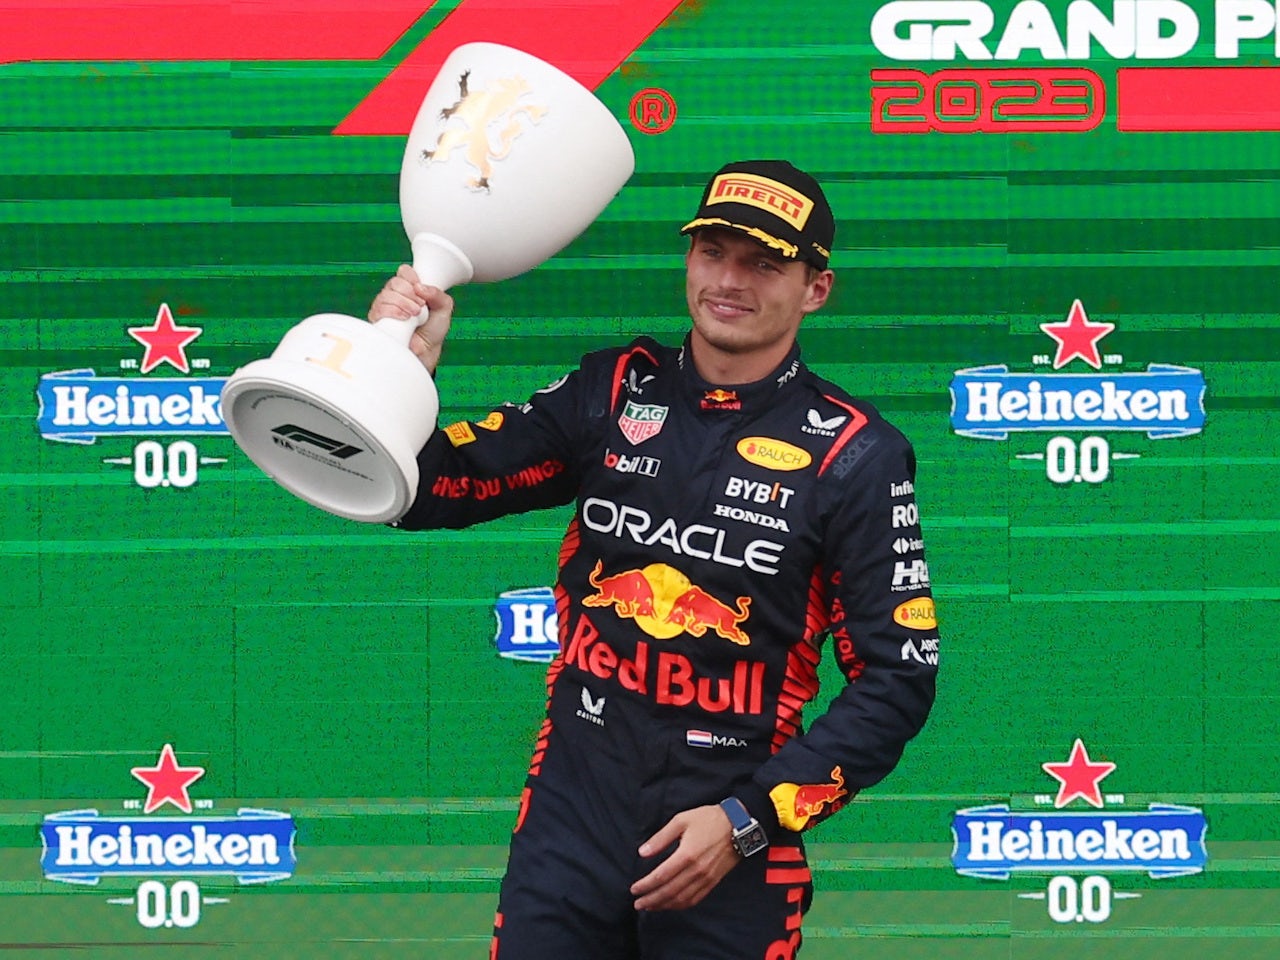 Verstappen can win every other race in 2023 - Marko